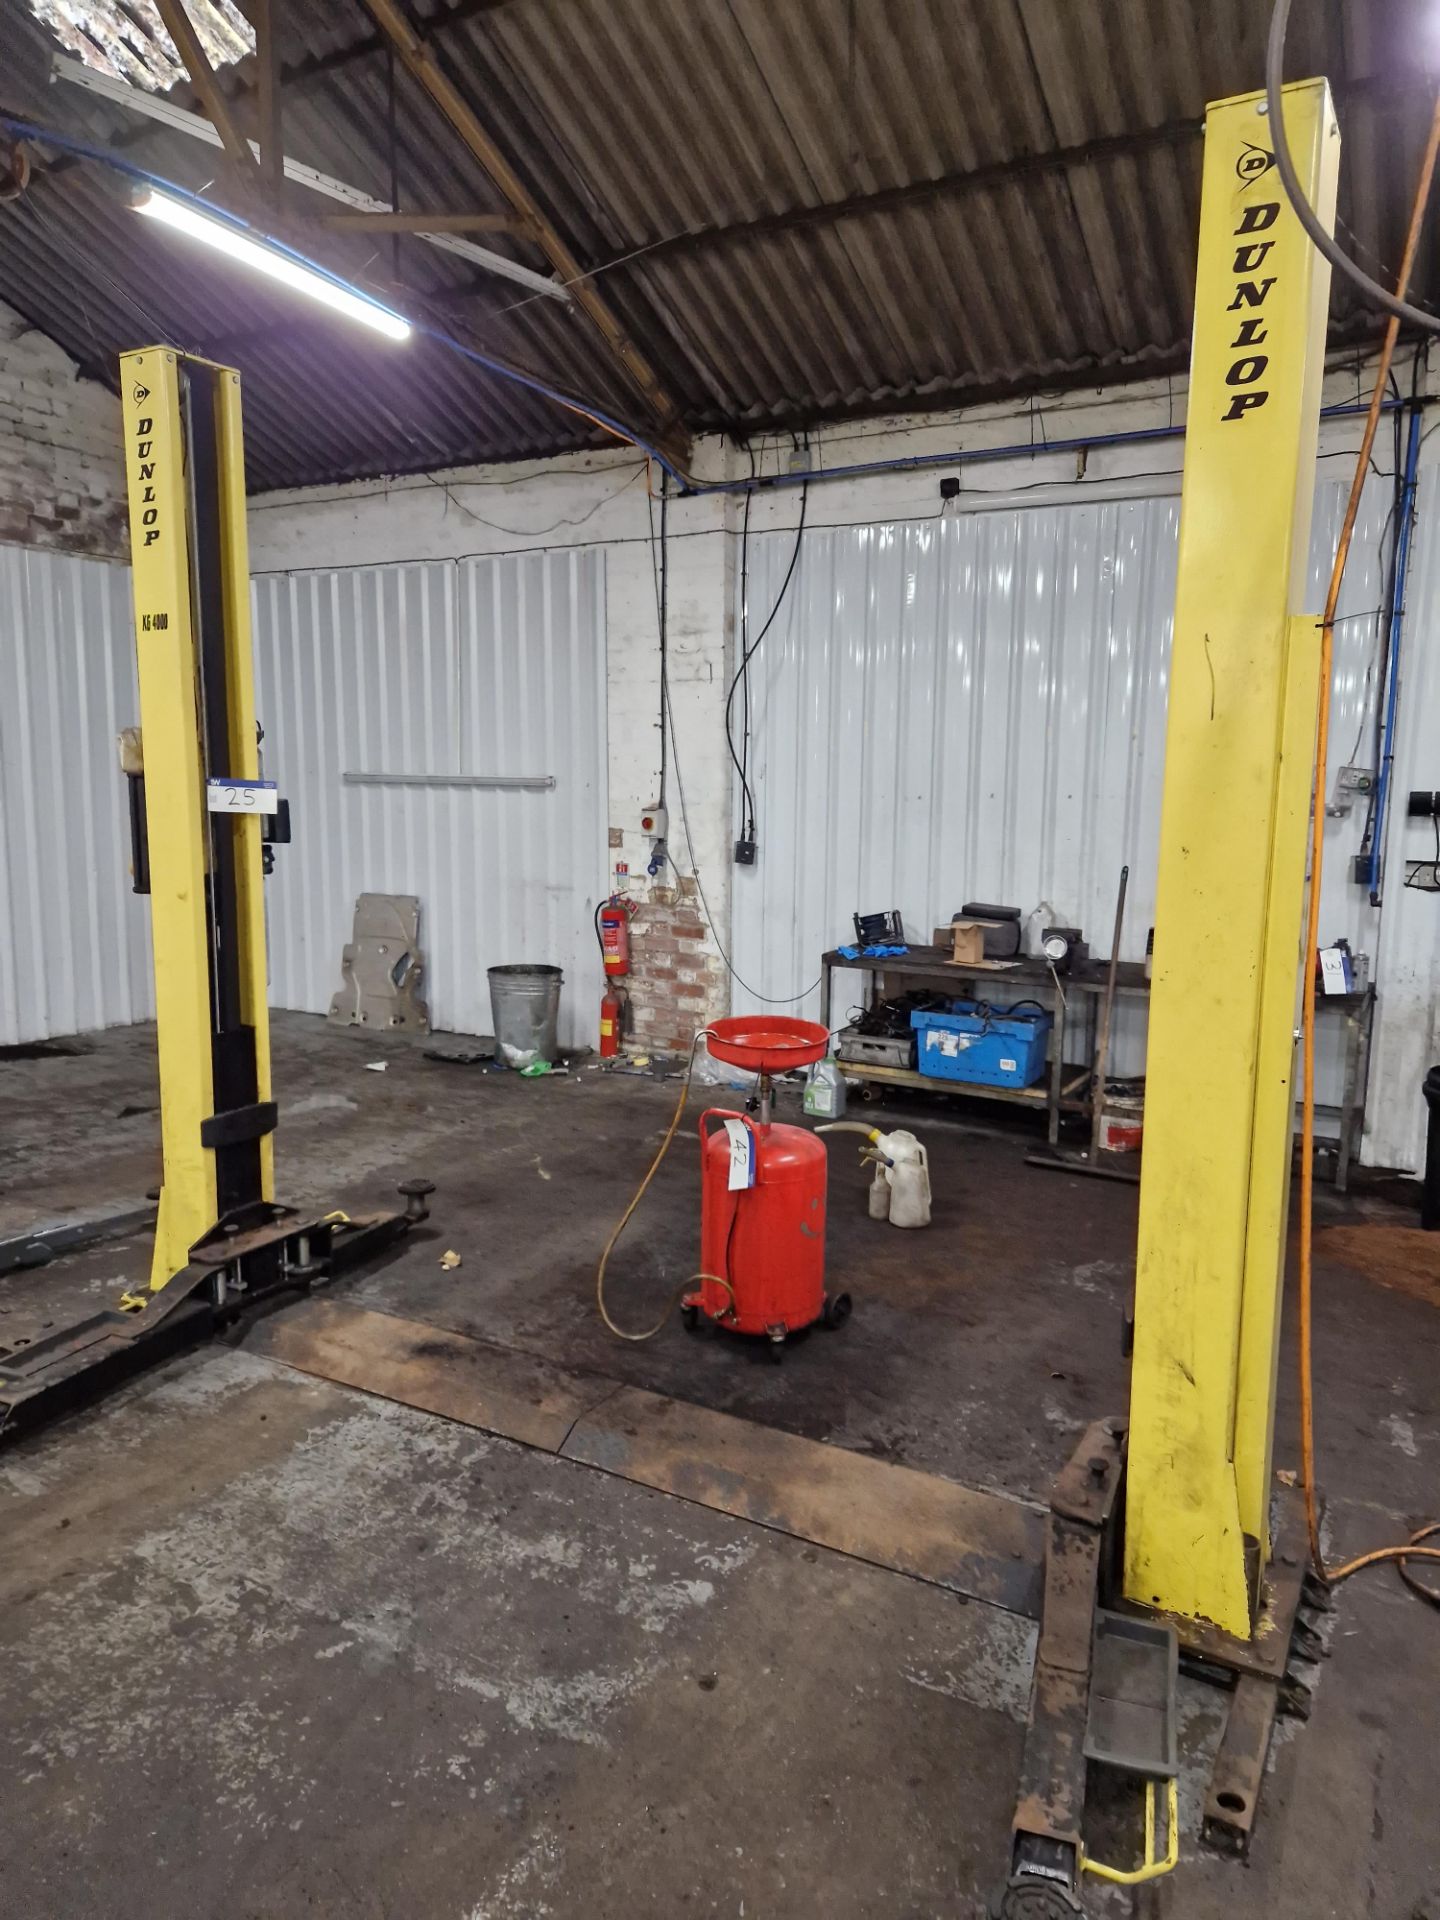 Dunlop Garage Equipment DL240/1 Twin Post Vehicle Lift, 4000KG Capacity, Year of Manufacture 2016,